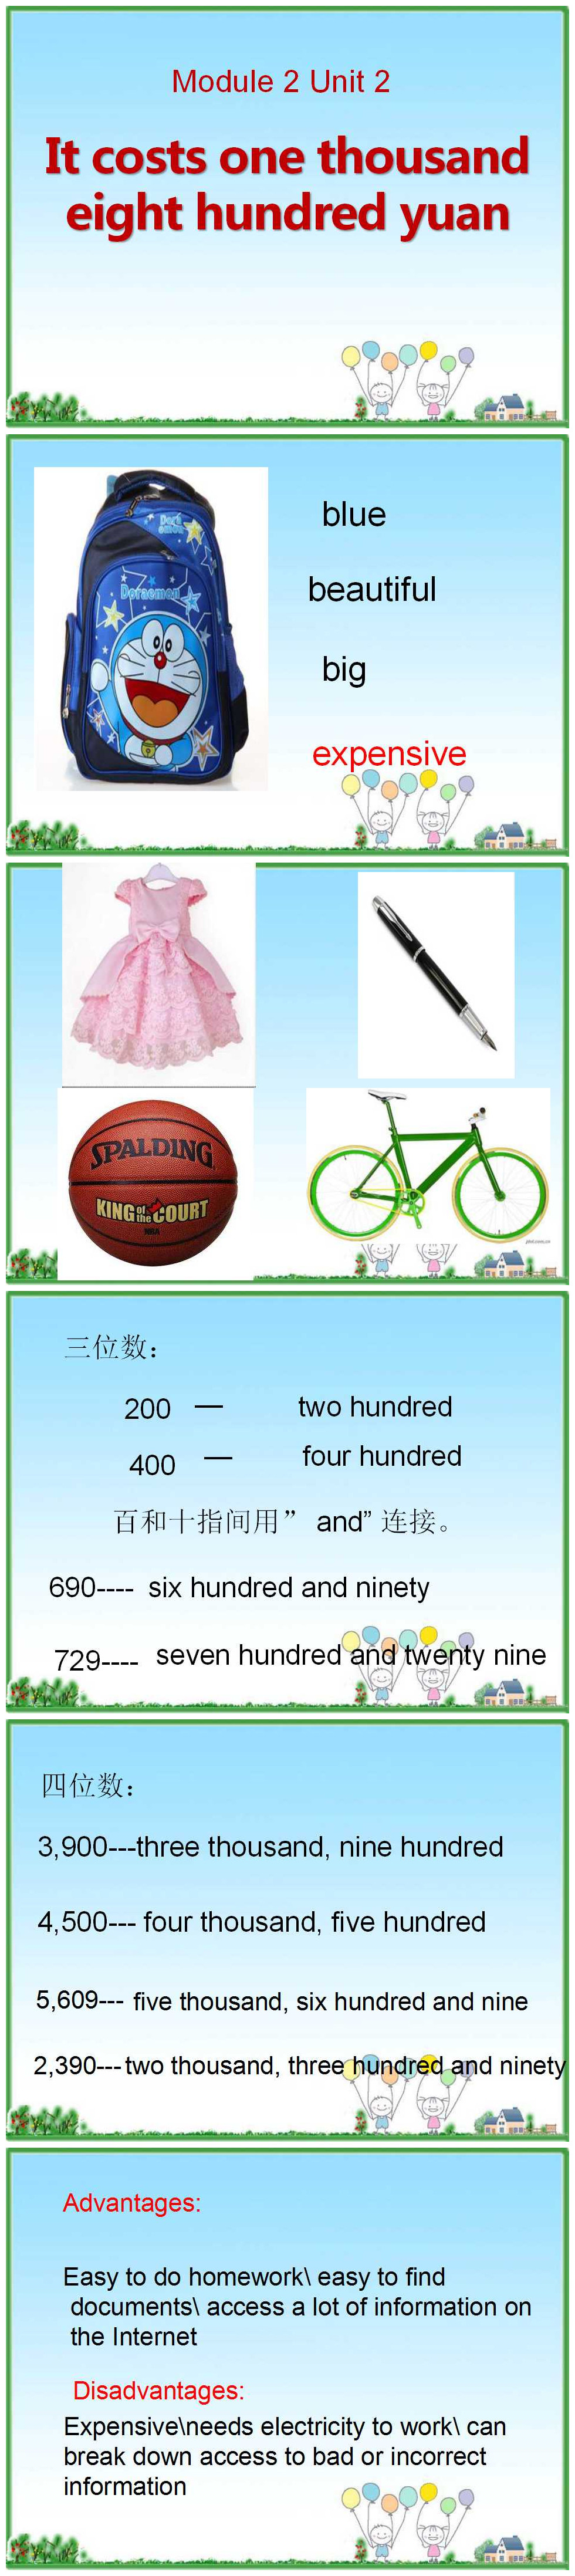 《It costs one thousand eight hundred yuan》PPT课件